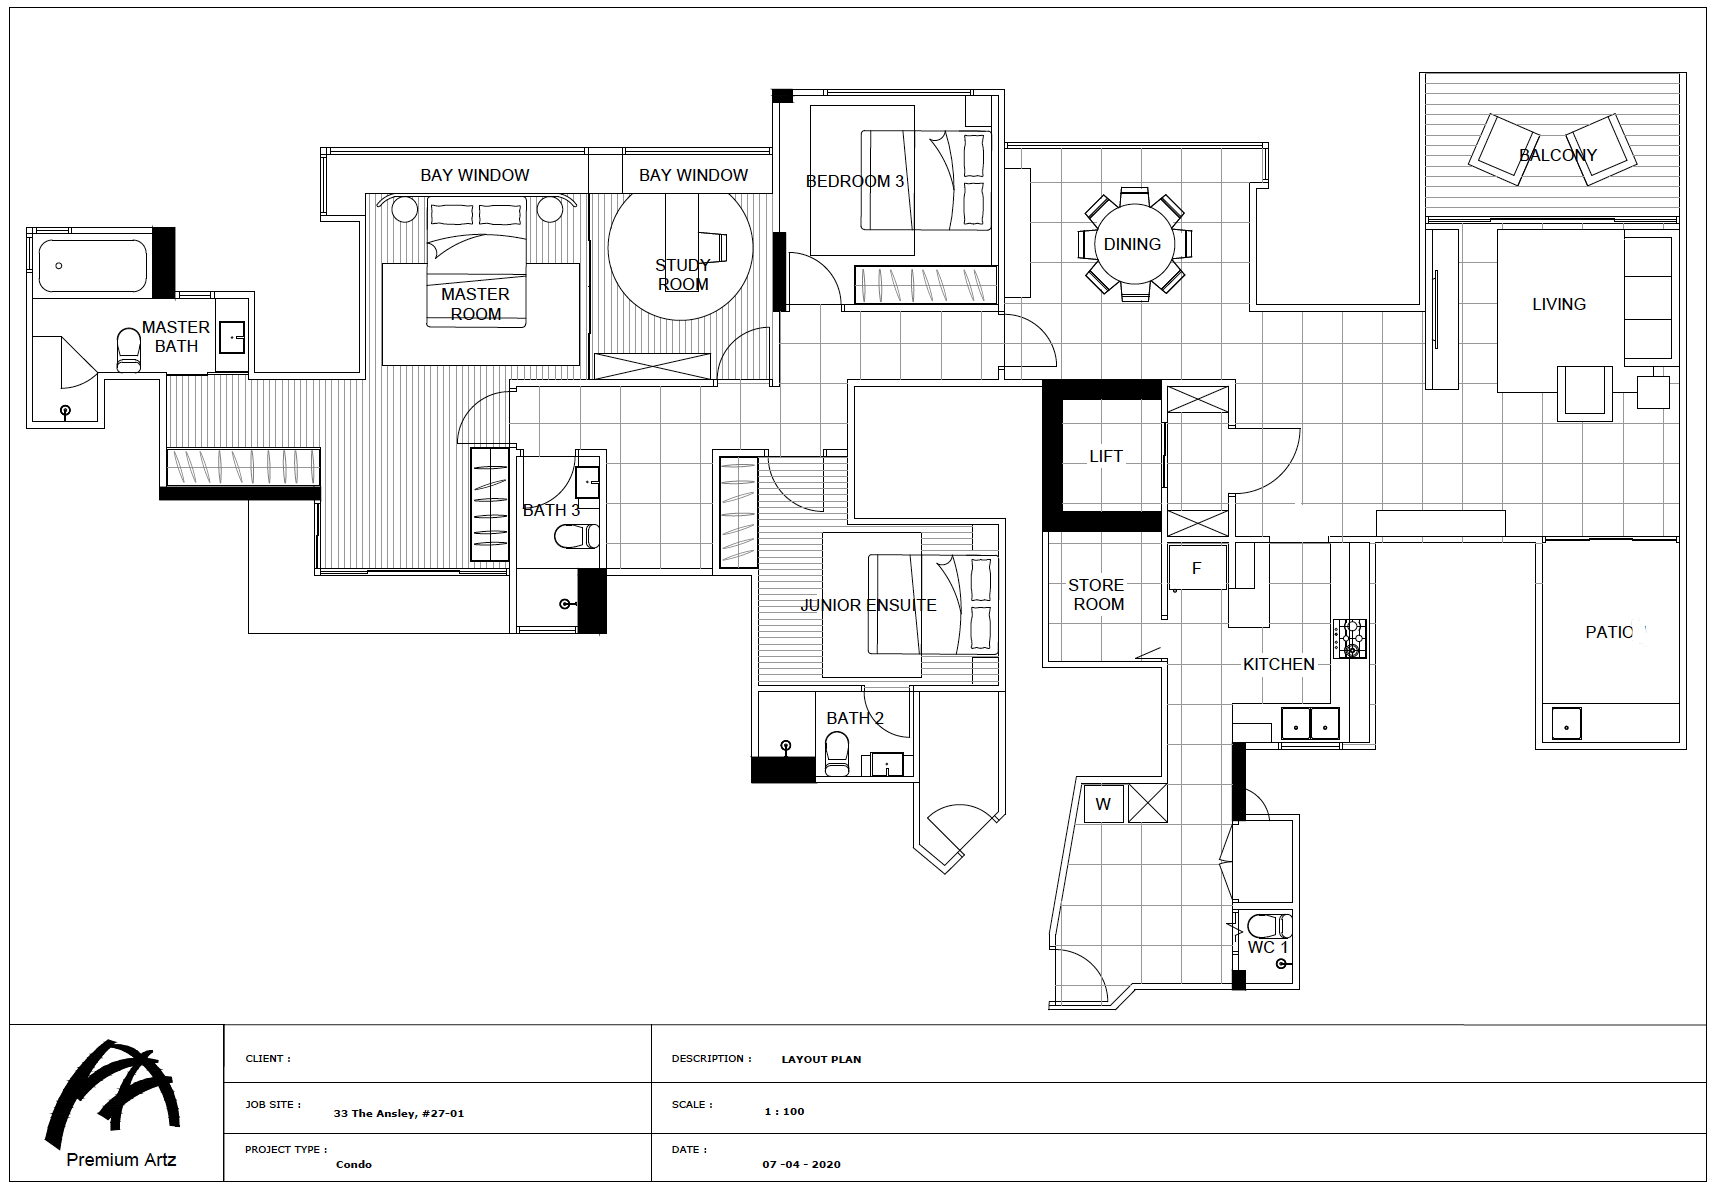 Current Floor Plan With Study Room